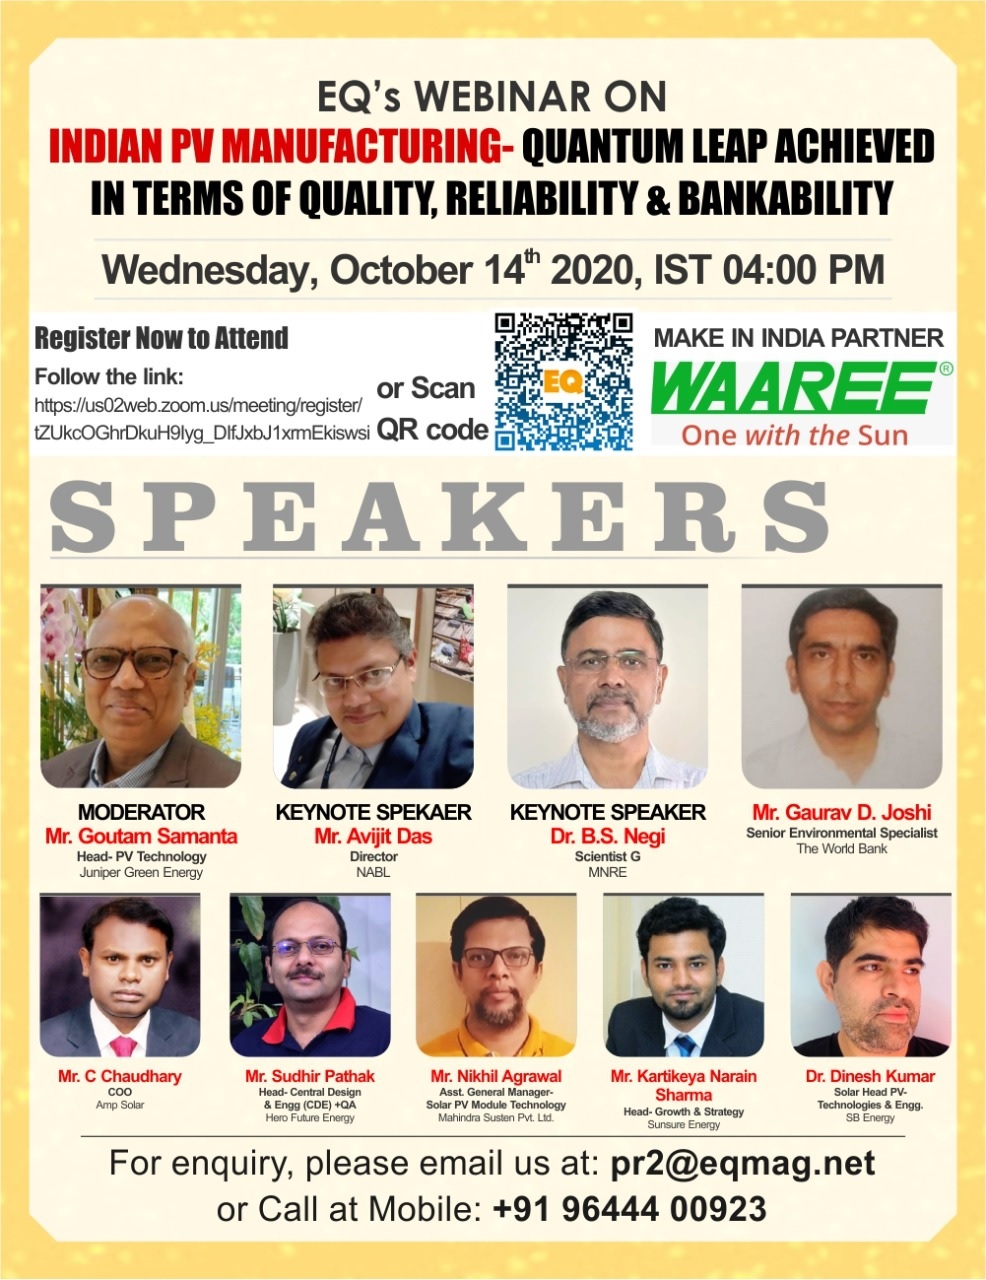 EQ Webinar on Indian PV Manufacturing – Quantum Leap Achieved in Terms of Quality, Reliability & Bankability on Wednesday October 14th from 04:00 PM Onwards….Register Now !!!